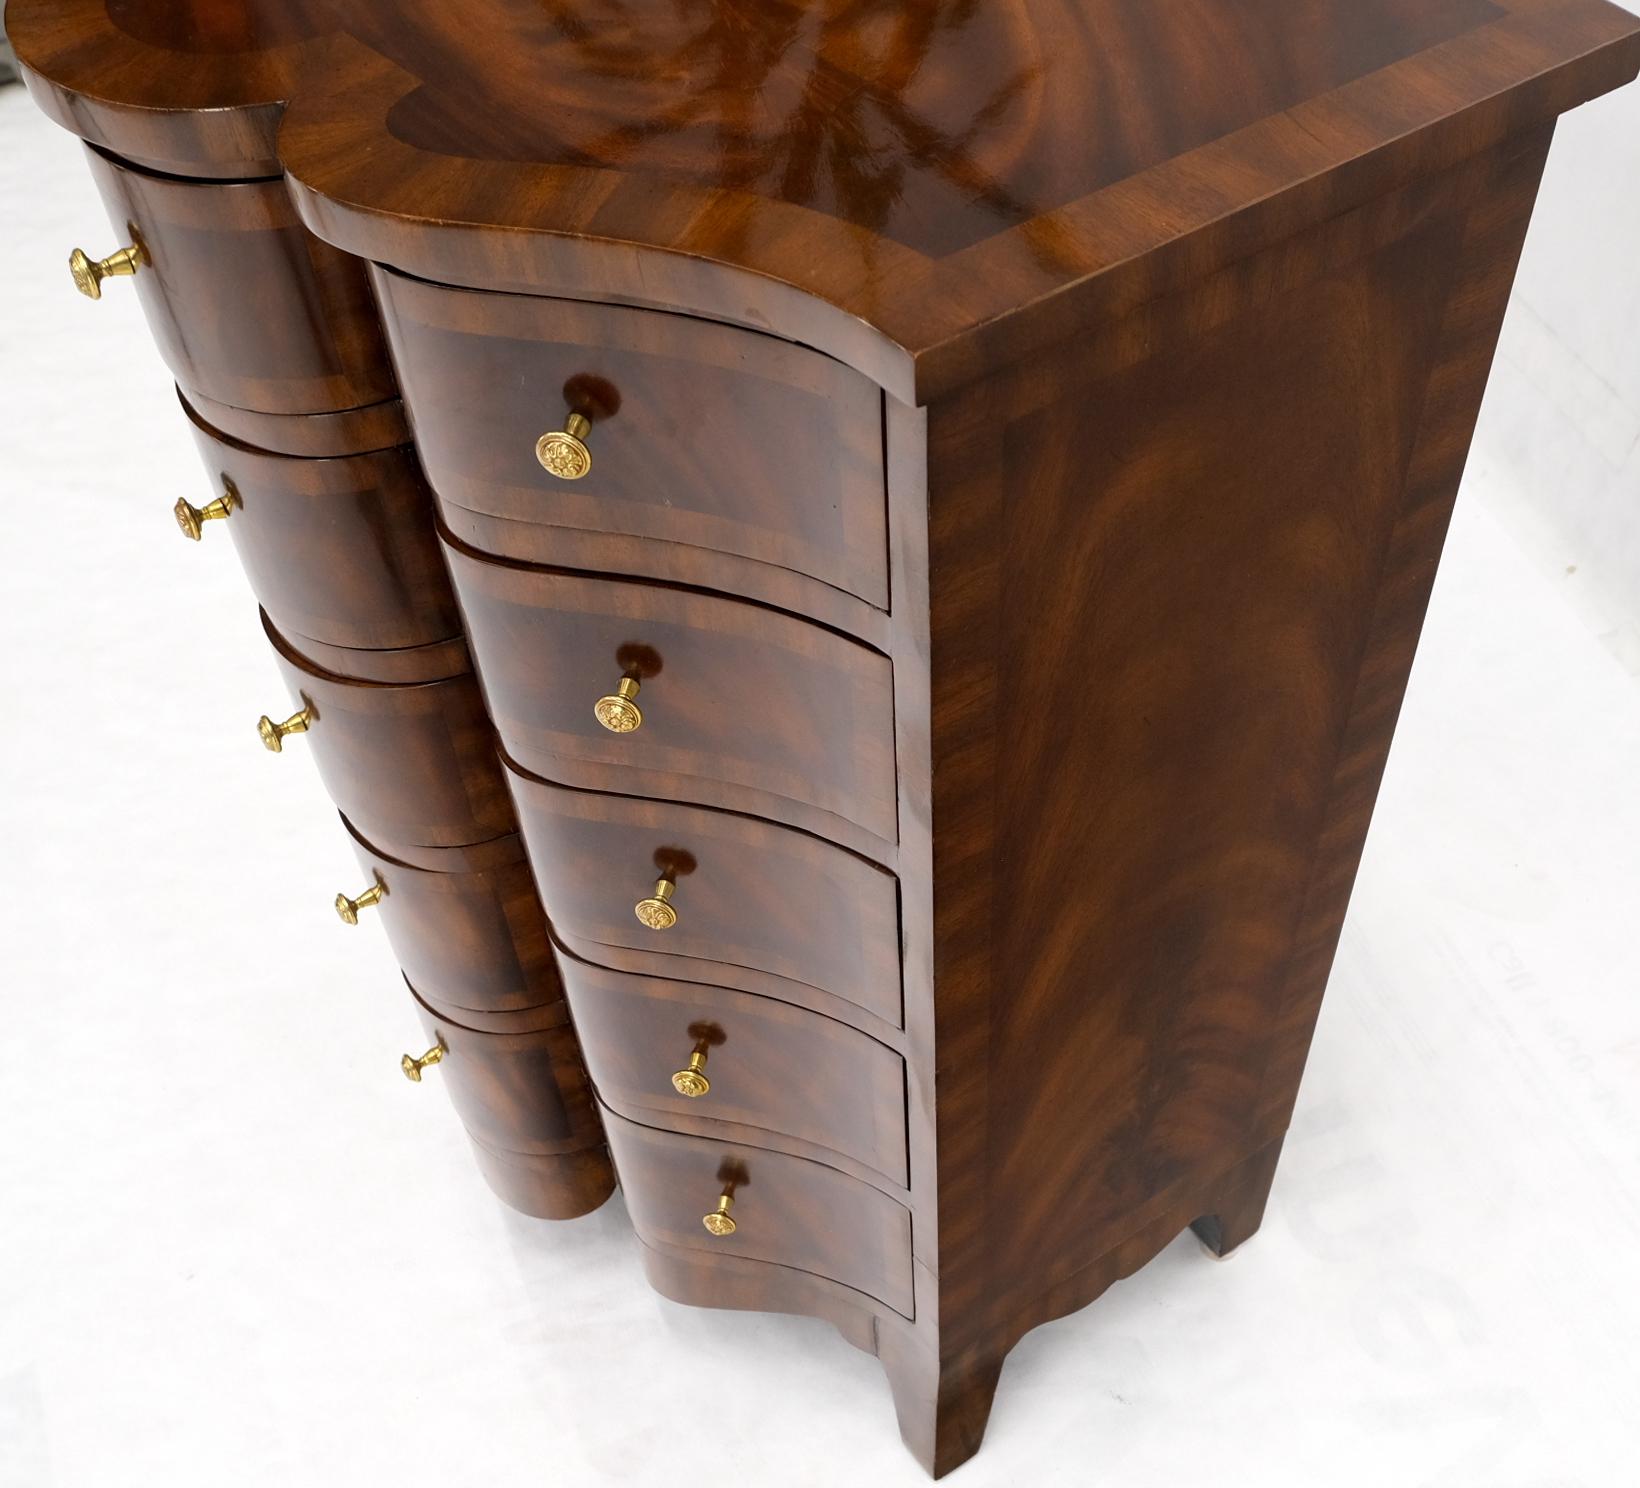 Banded Top Serpentine Front 5 Drawers Petite Commode Bachelor Chest Dresser 3